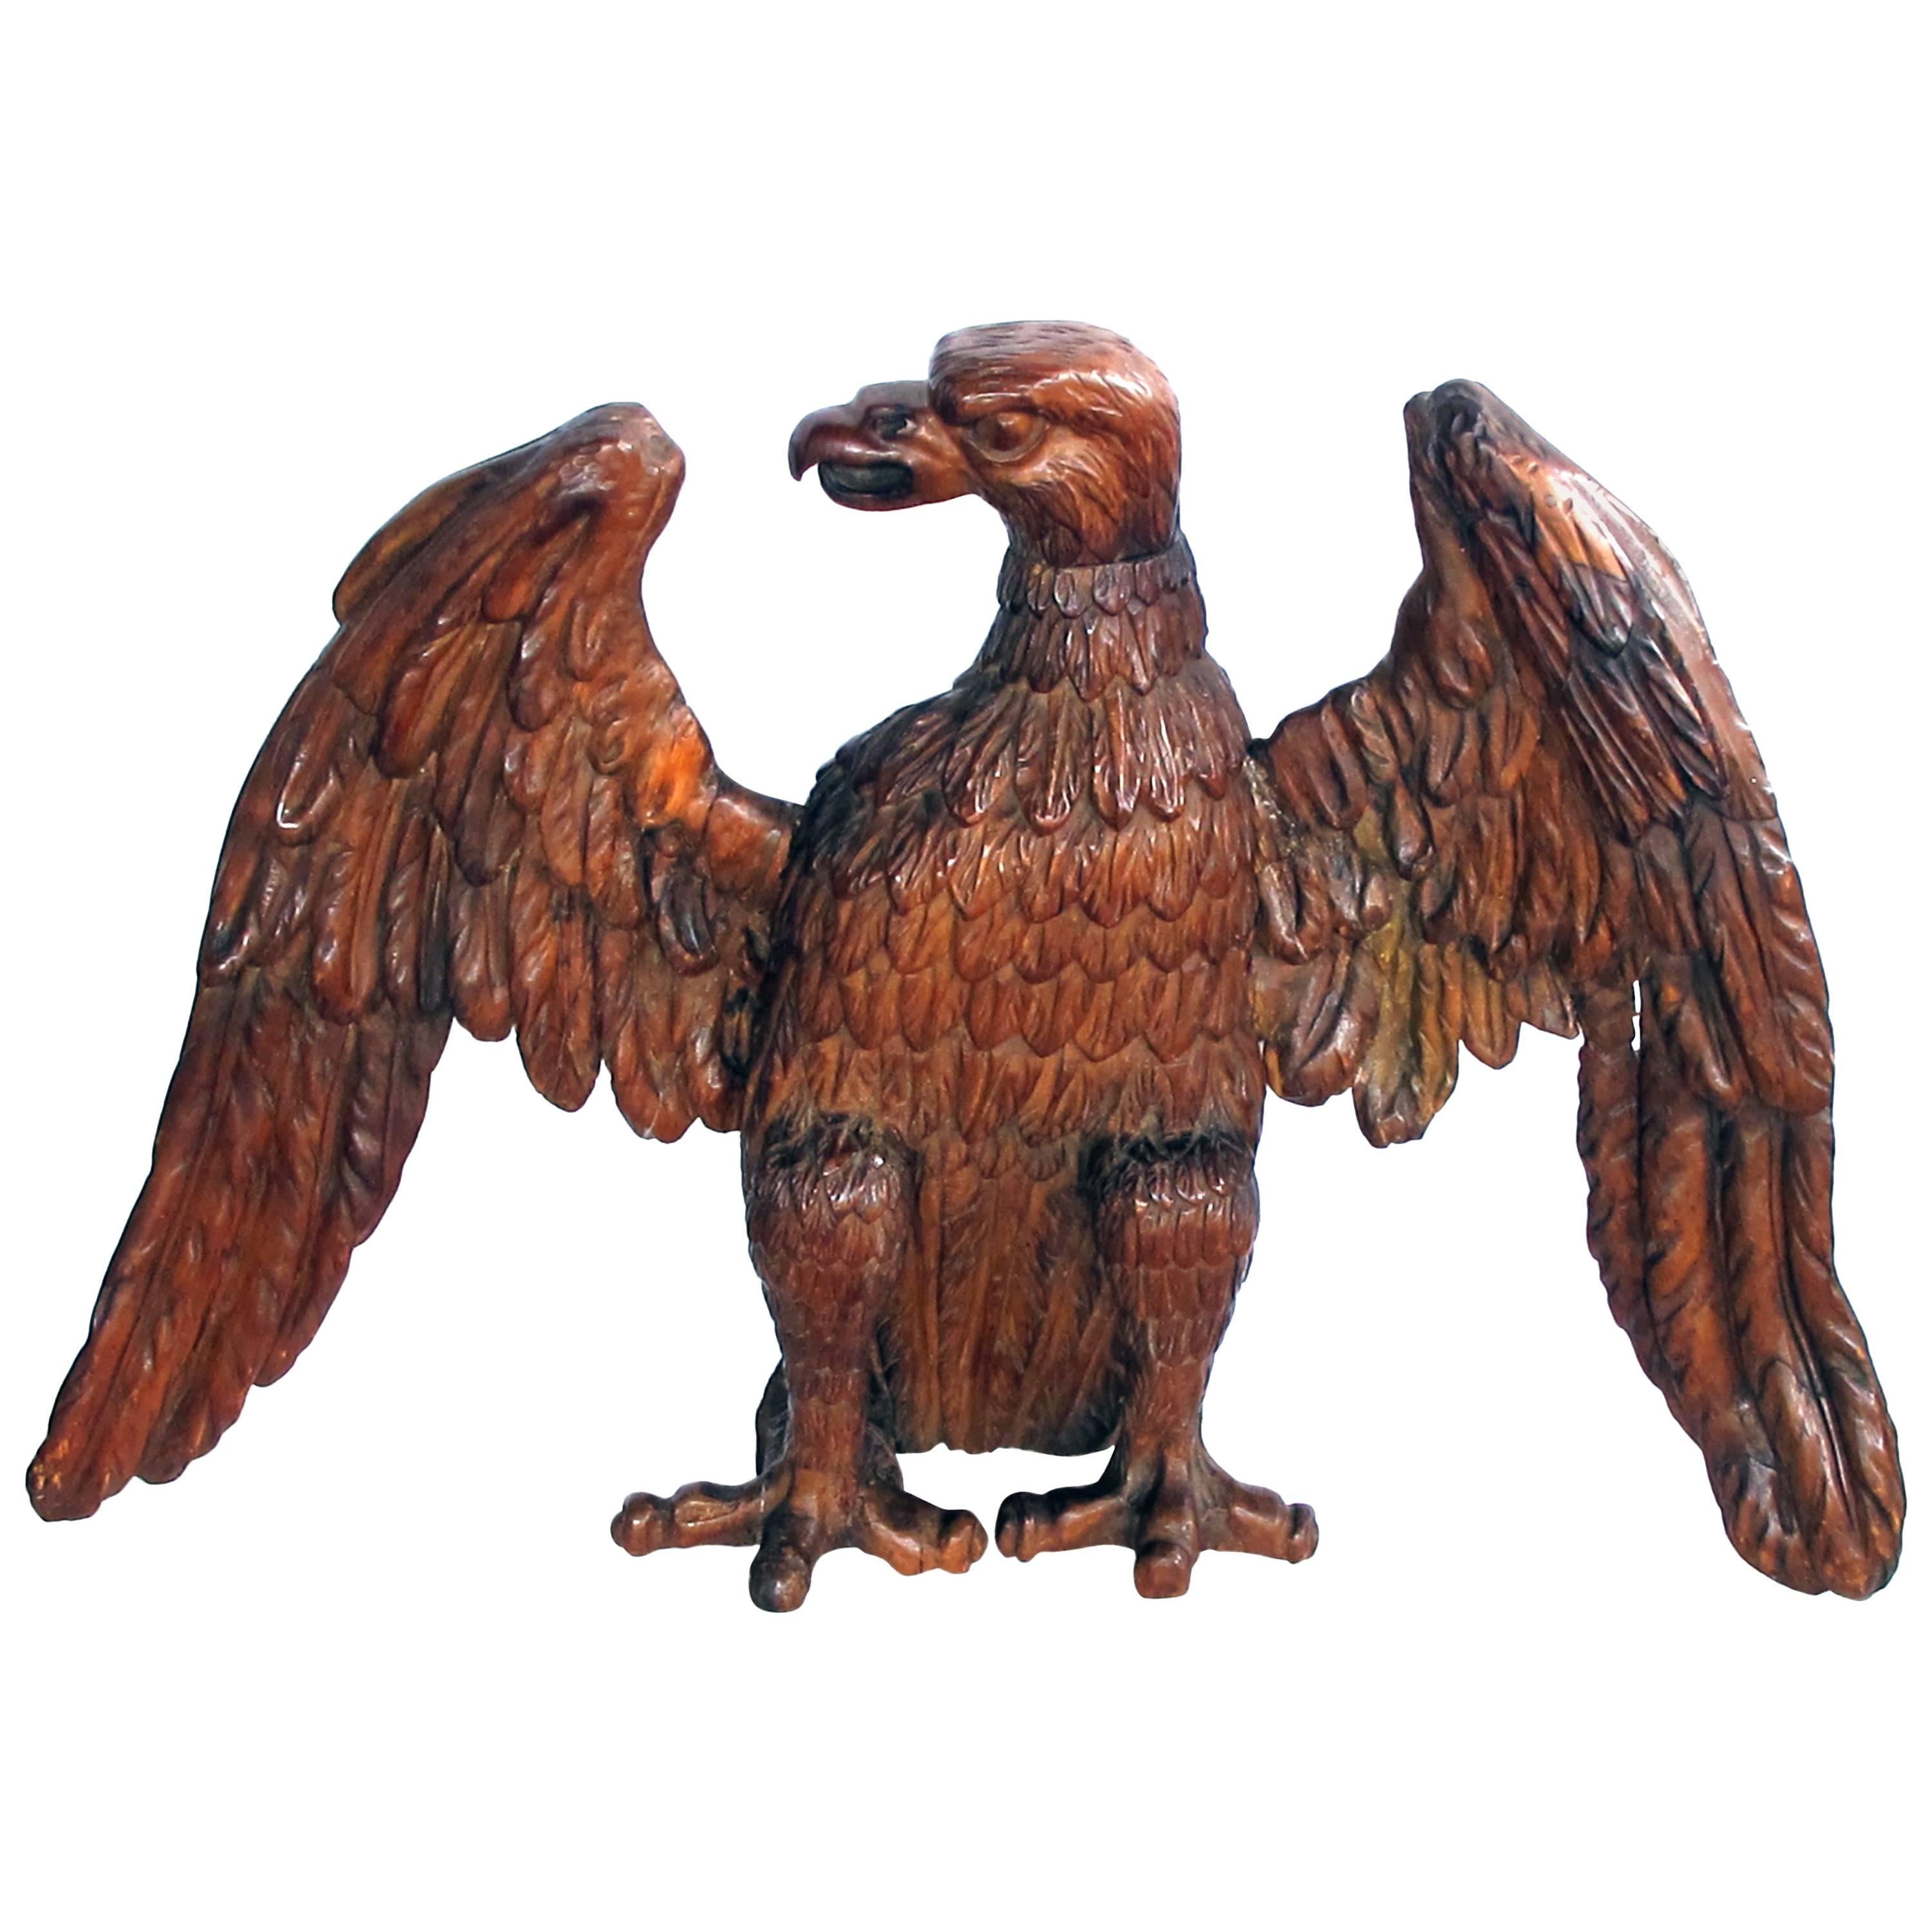 Exceptional American 19th Century Folk Art Wood Carving of an American Eagle